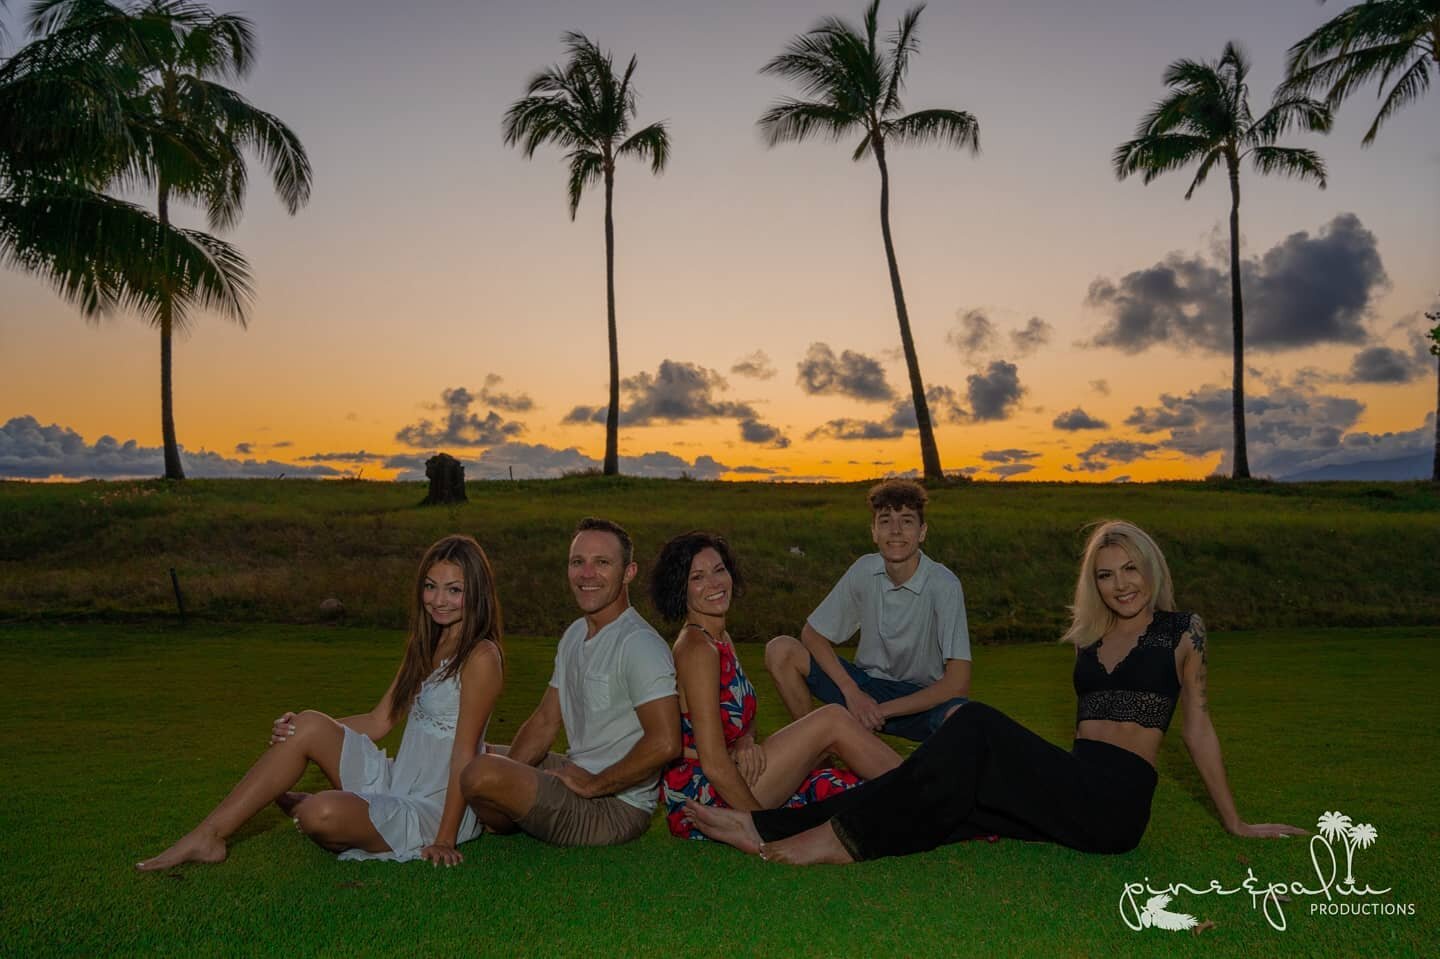 When in Maui, you'll always end up acquiring new members to your ohana😂✌#funfact

Swipe to see their 'ohana grow!👉

Reliving this tiny moment from one of our favorites!!❤☀️🌴

#pineandpalmproductions #pineandpalm #mauiphotography #mauiphotographer 